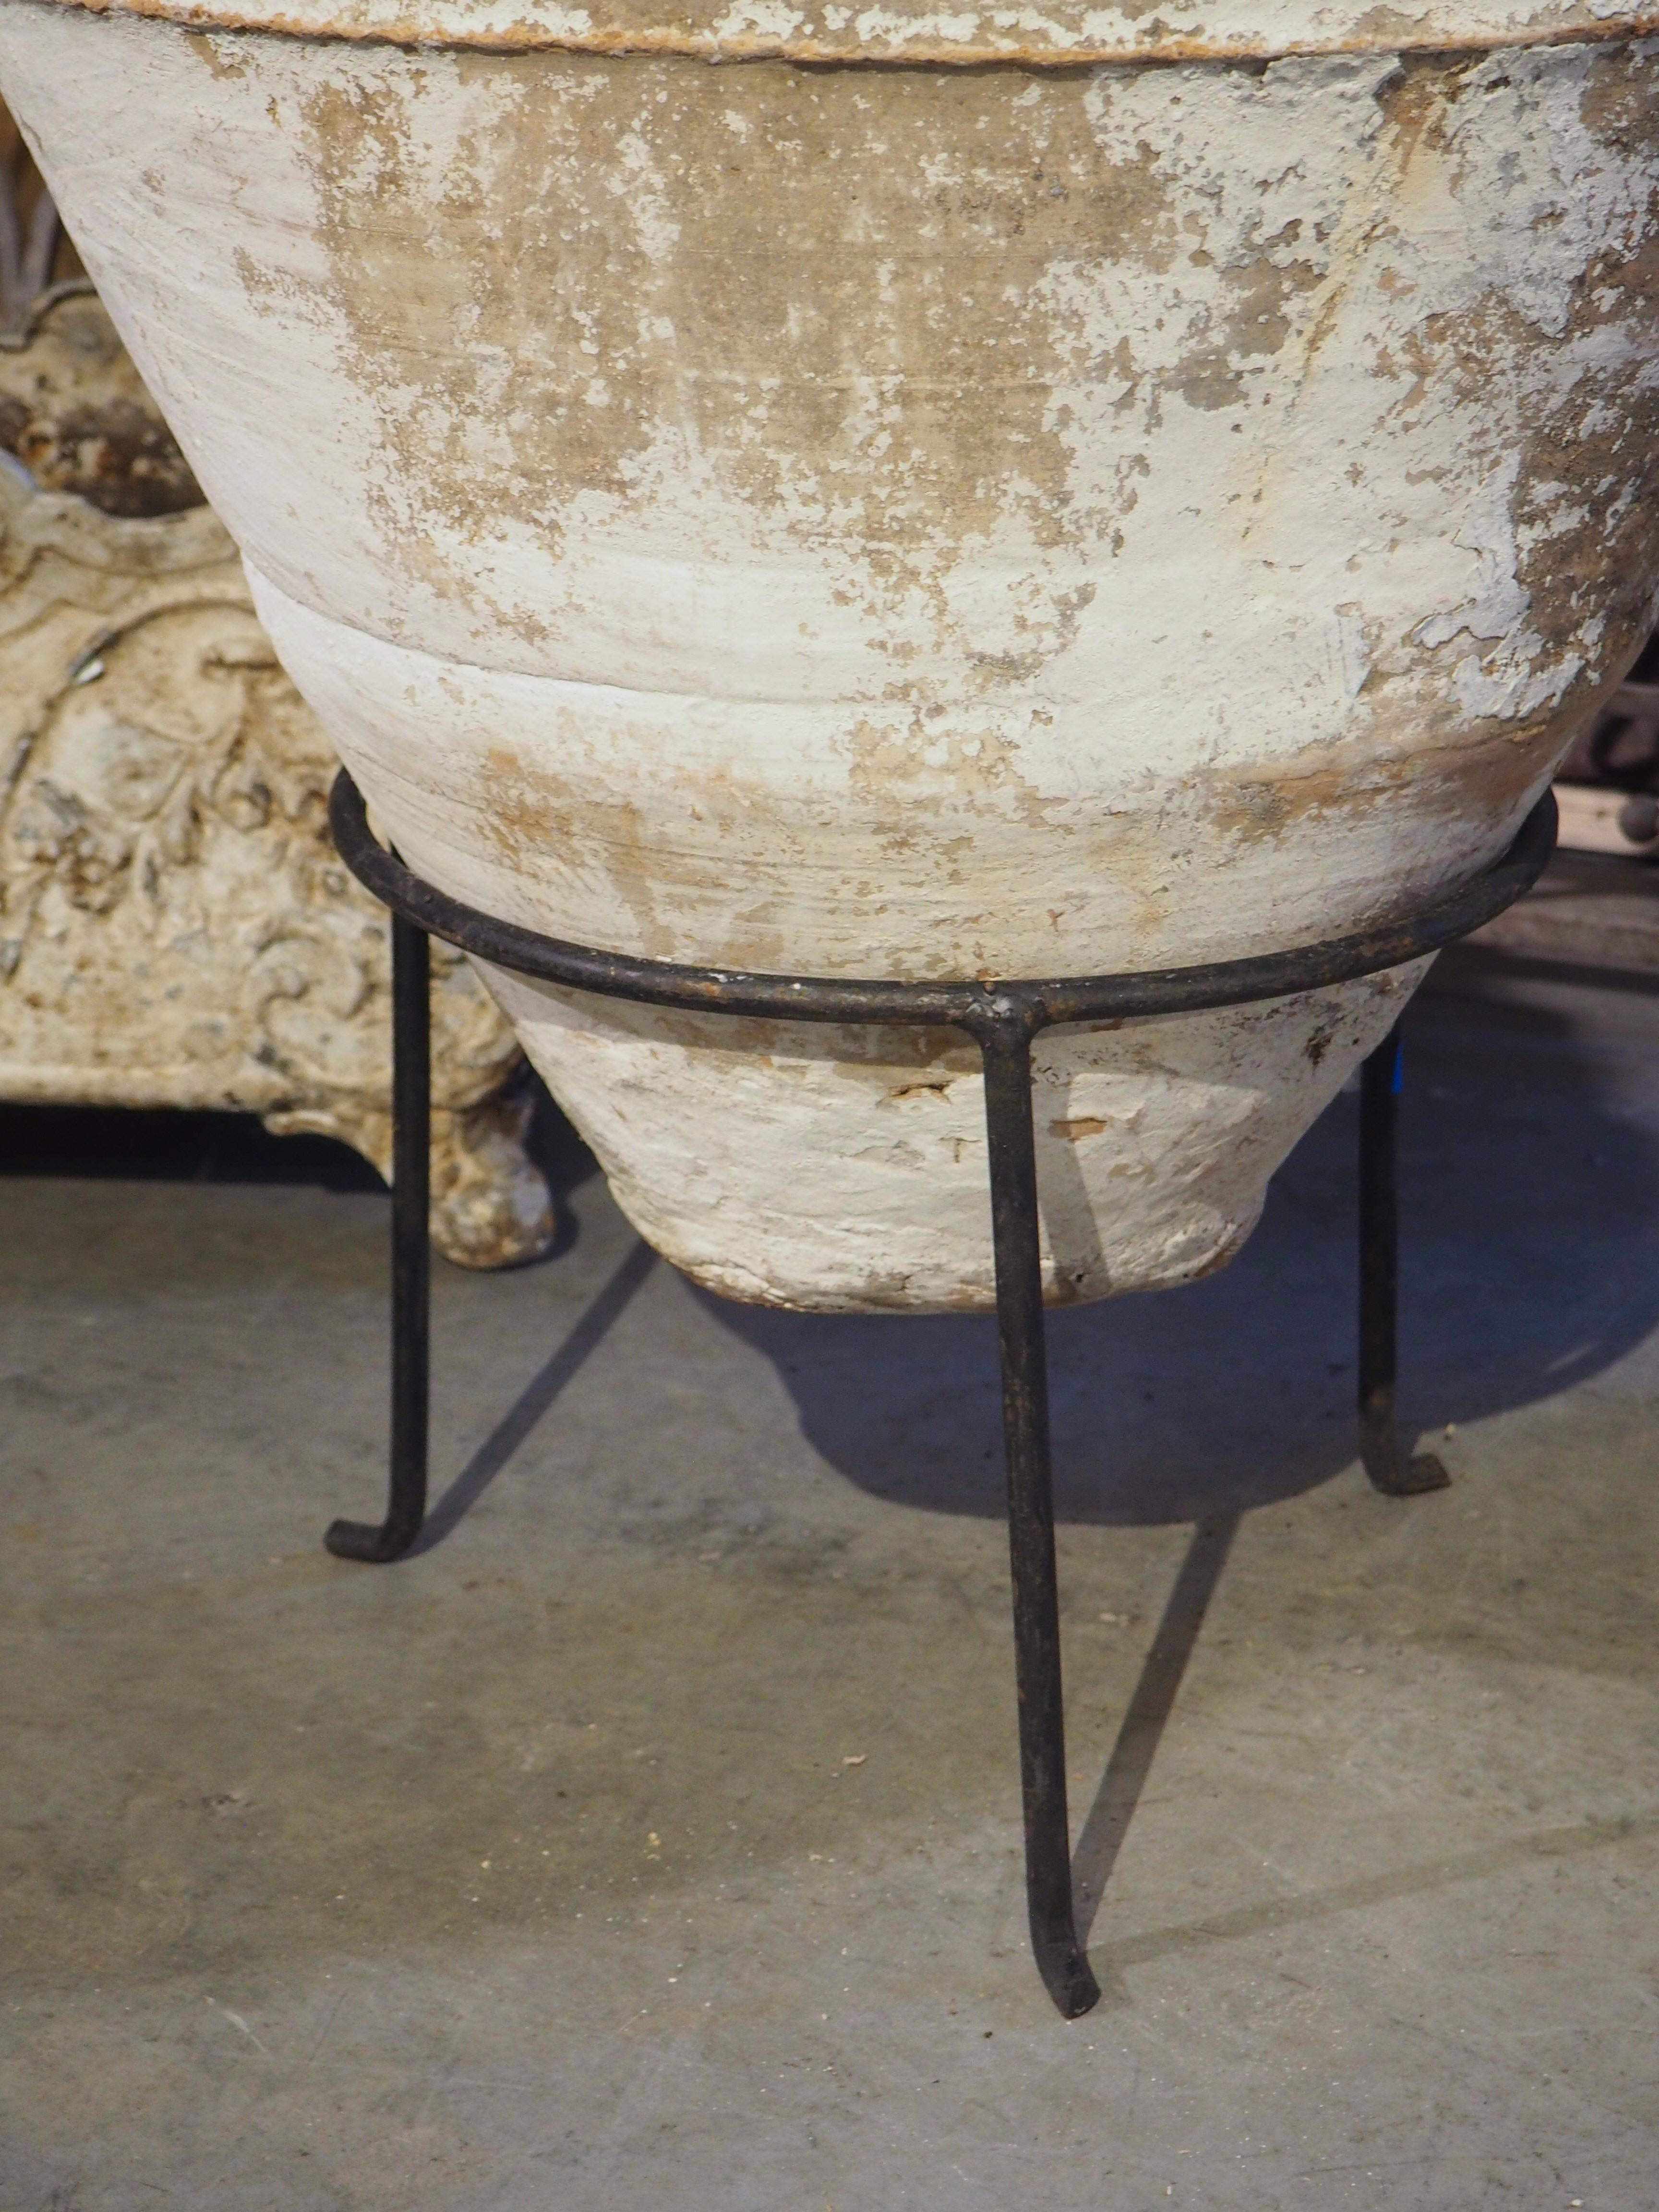 Known in Greece as a koroniotiko, this olive oil or grain pot dates to circa 1890. The large, hand-thrown terra cotta pot, which was painted white, sits in a painted black iron stand that was added more recently. Koroniotikos pots often have